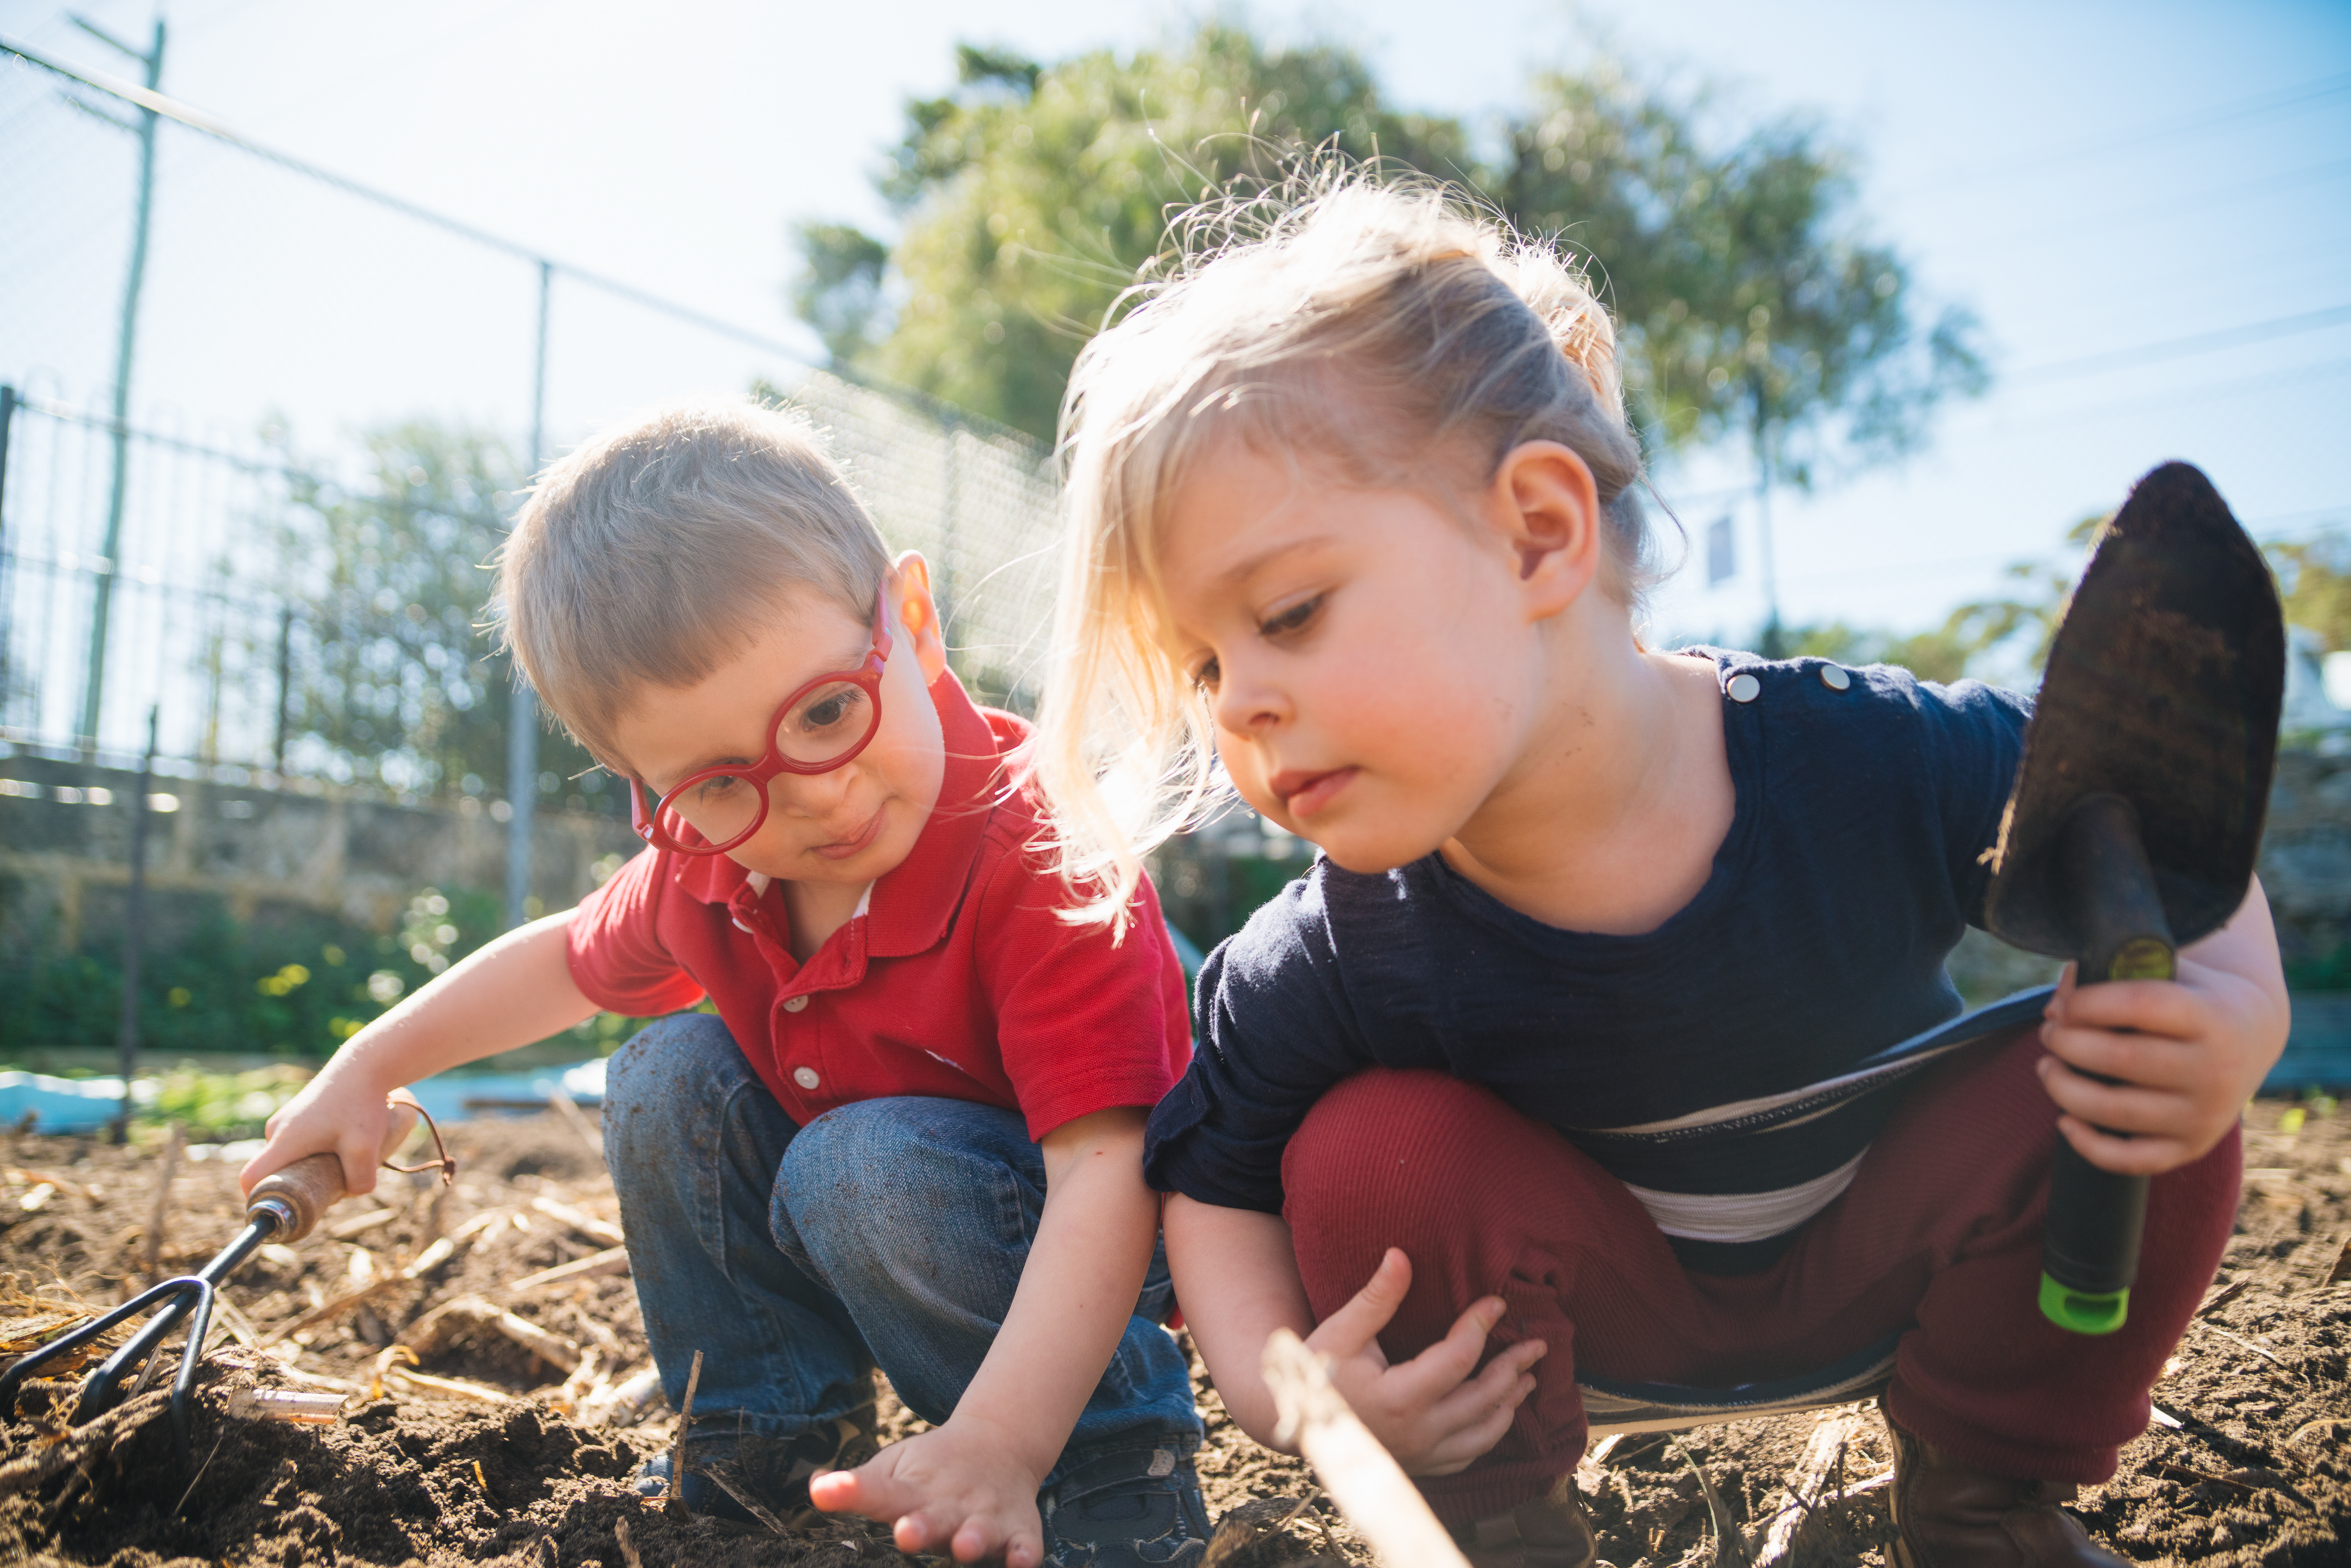 Two young children digging in a garden